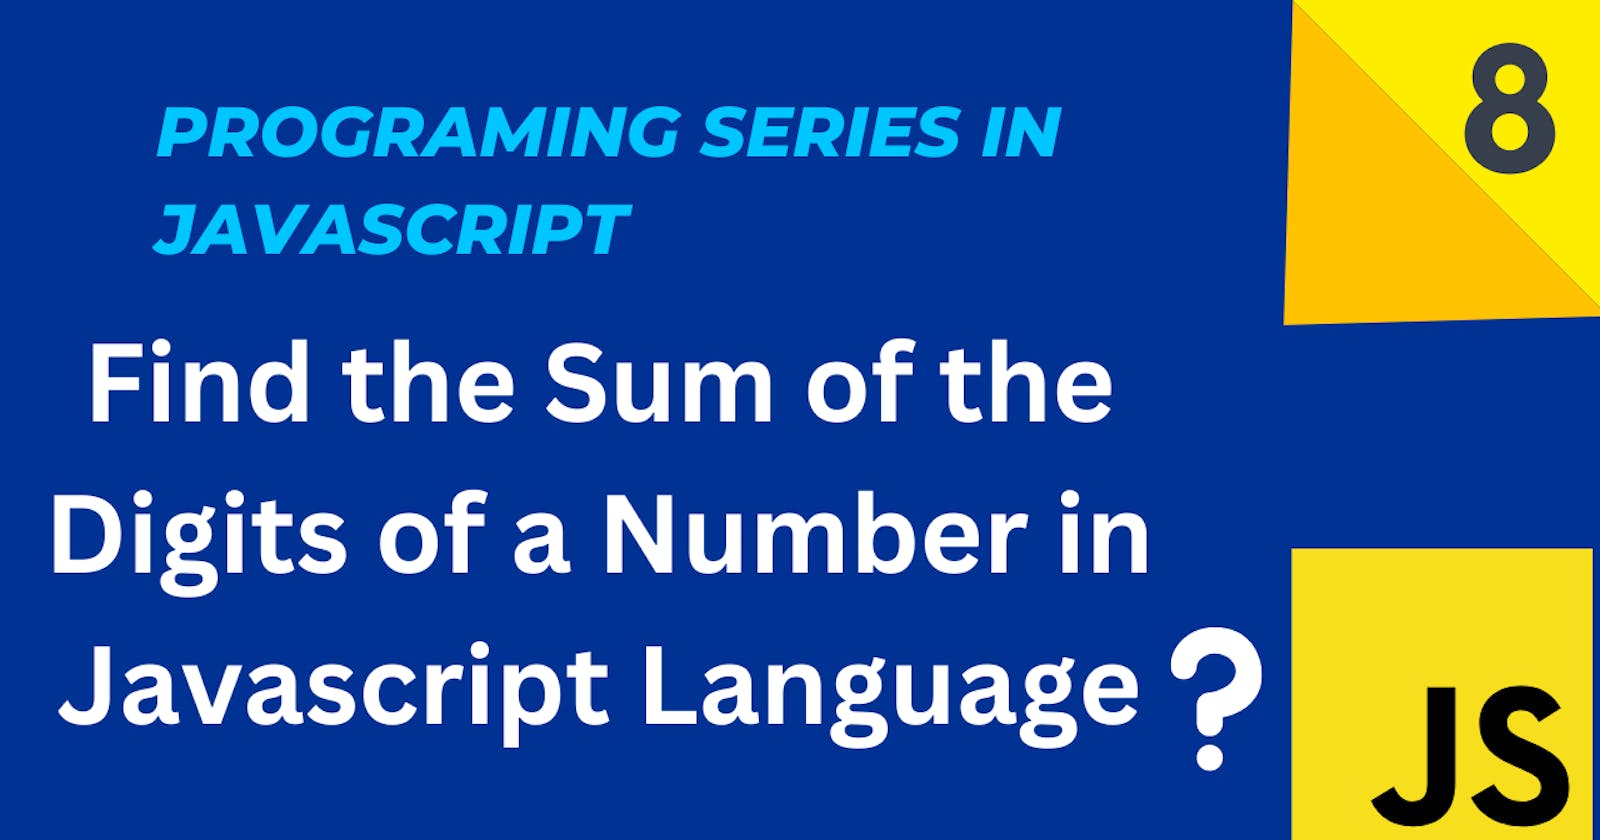 Find the Sum of the Digits of a Number in Javascript Language